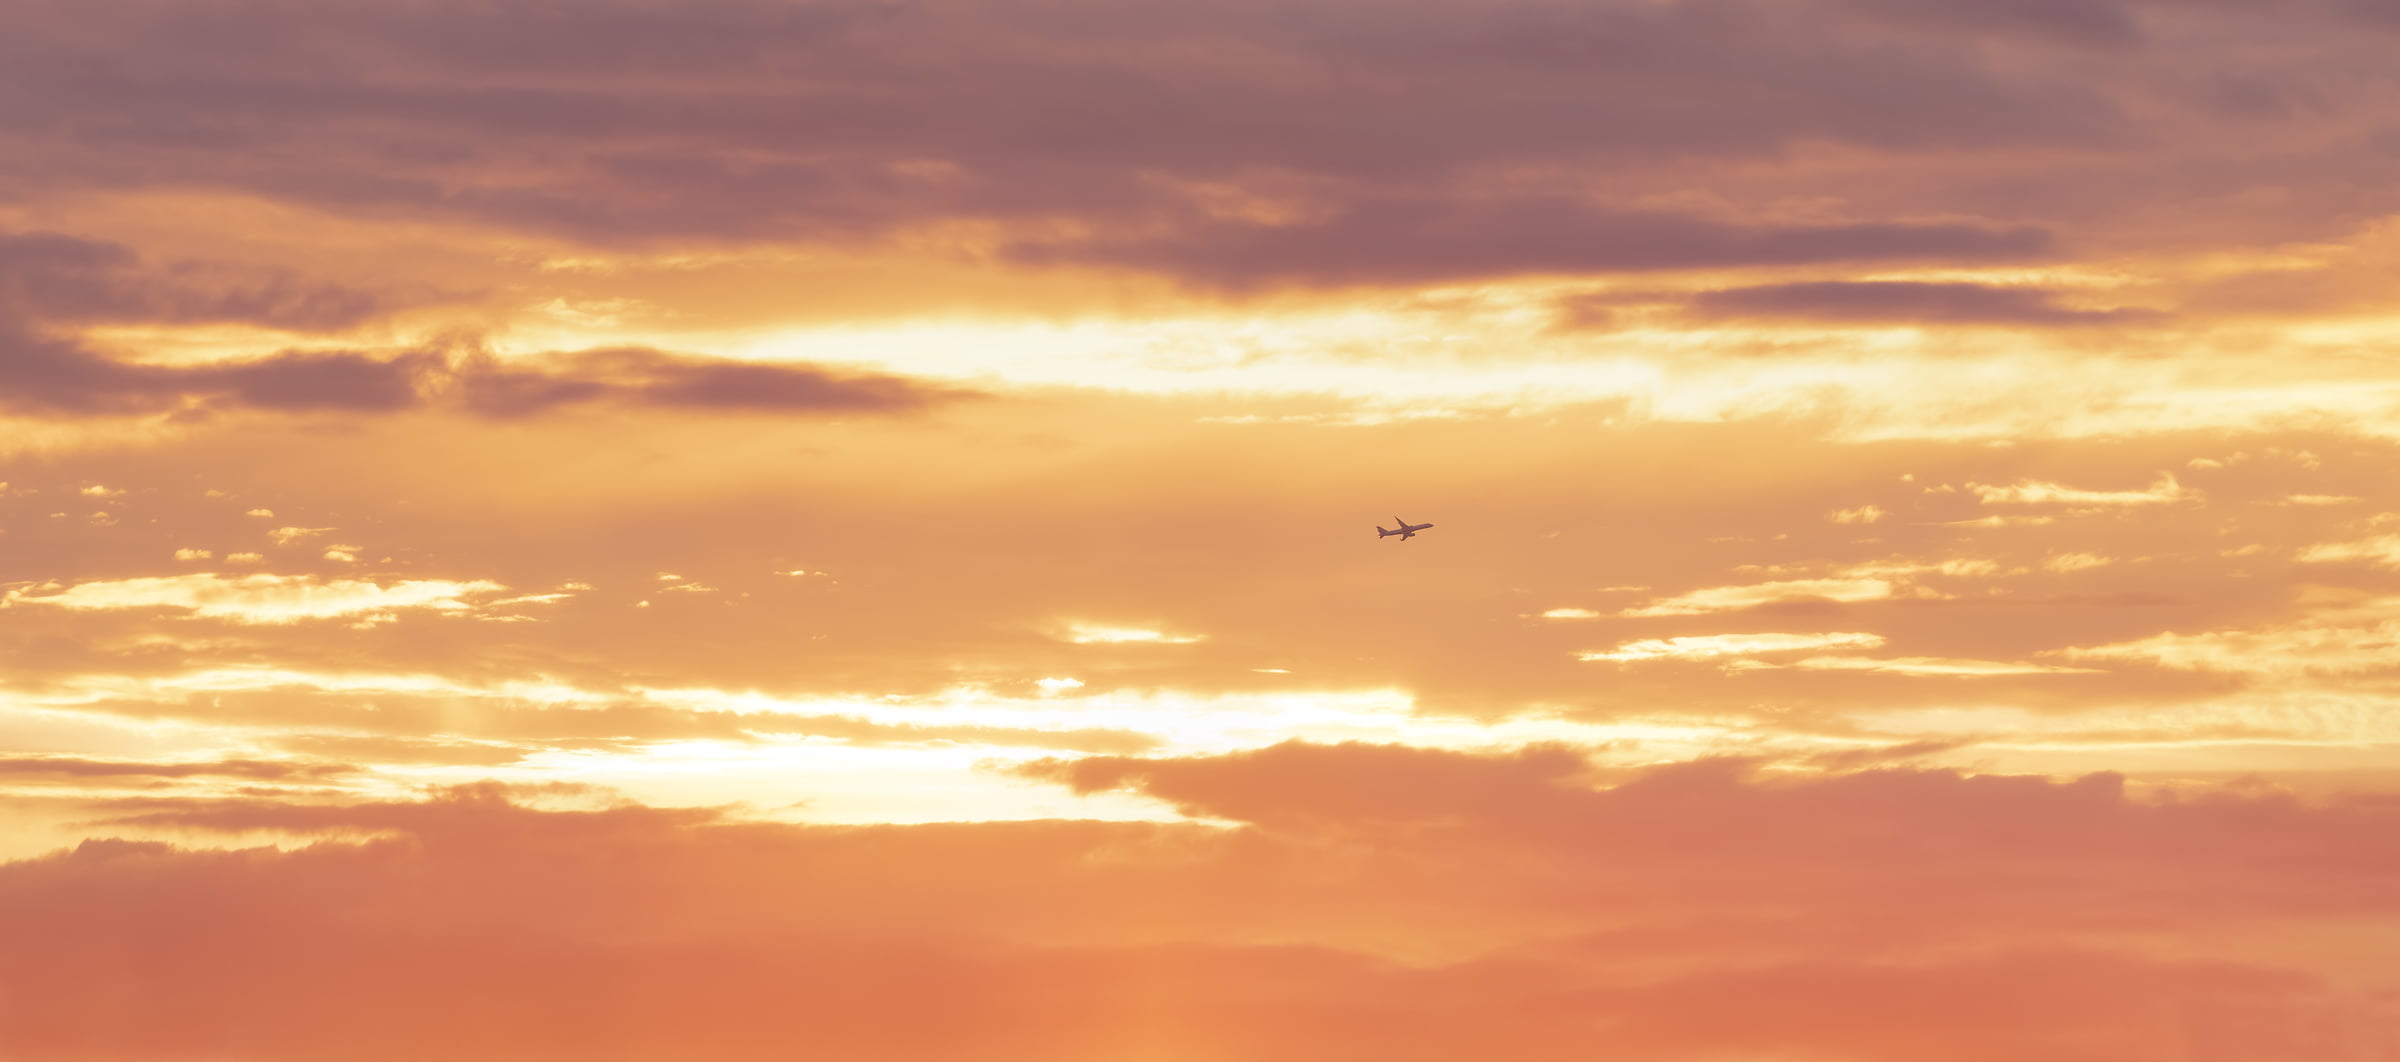 328 megapixels! A very high resolution, large-format VAST photo print of a plane backdropped by a beautiful sunset; photograph created by Dan Piech in New York City.